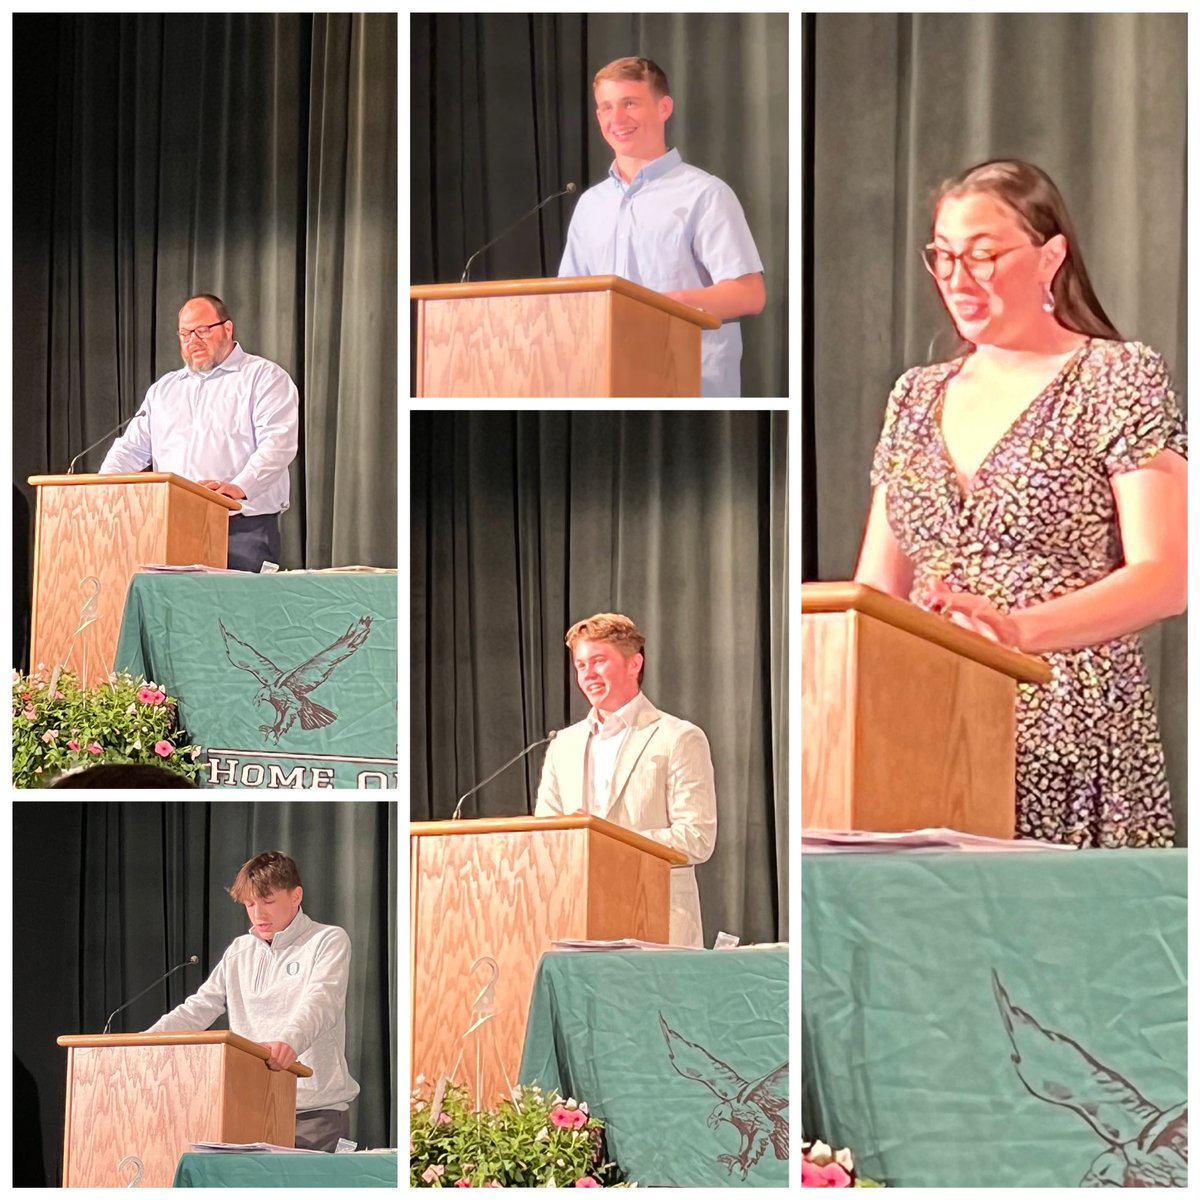 S/o to all our speakers at the Academic Honors Celebration who shared their thoughts on the importance of determination and grit. Austin Williams - Board Trustee, Charles Garrett - 9th, Ethan Schaefer - 10th, Blair Scott - 11th, Isabella Strader- 12th